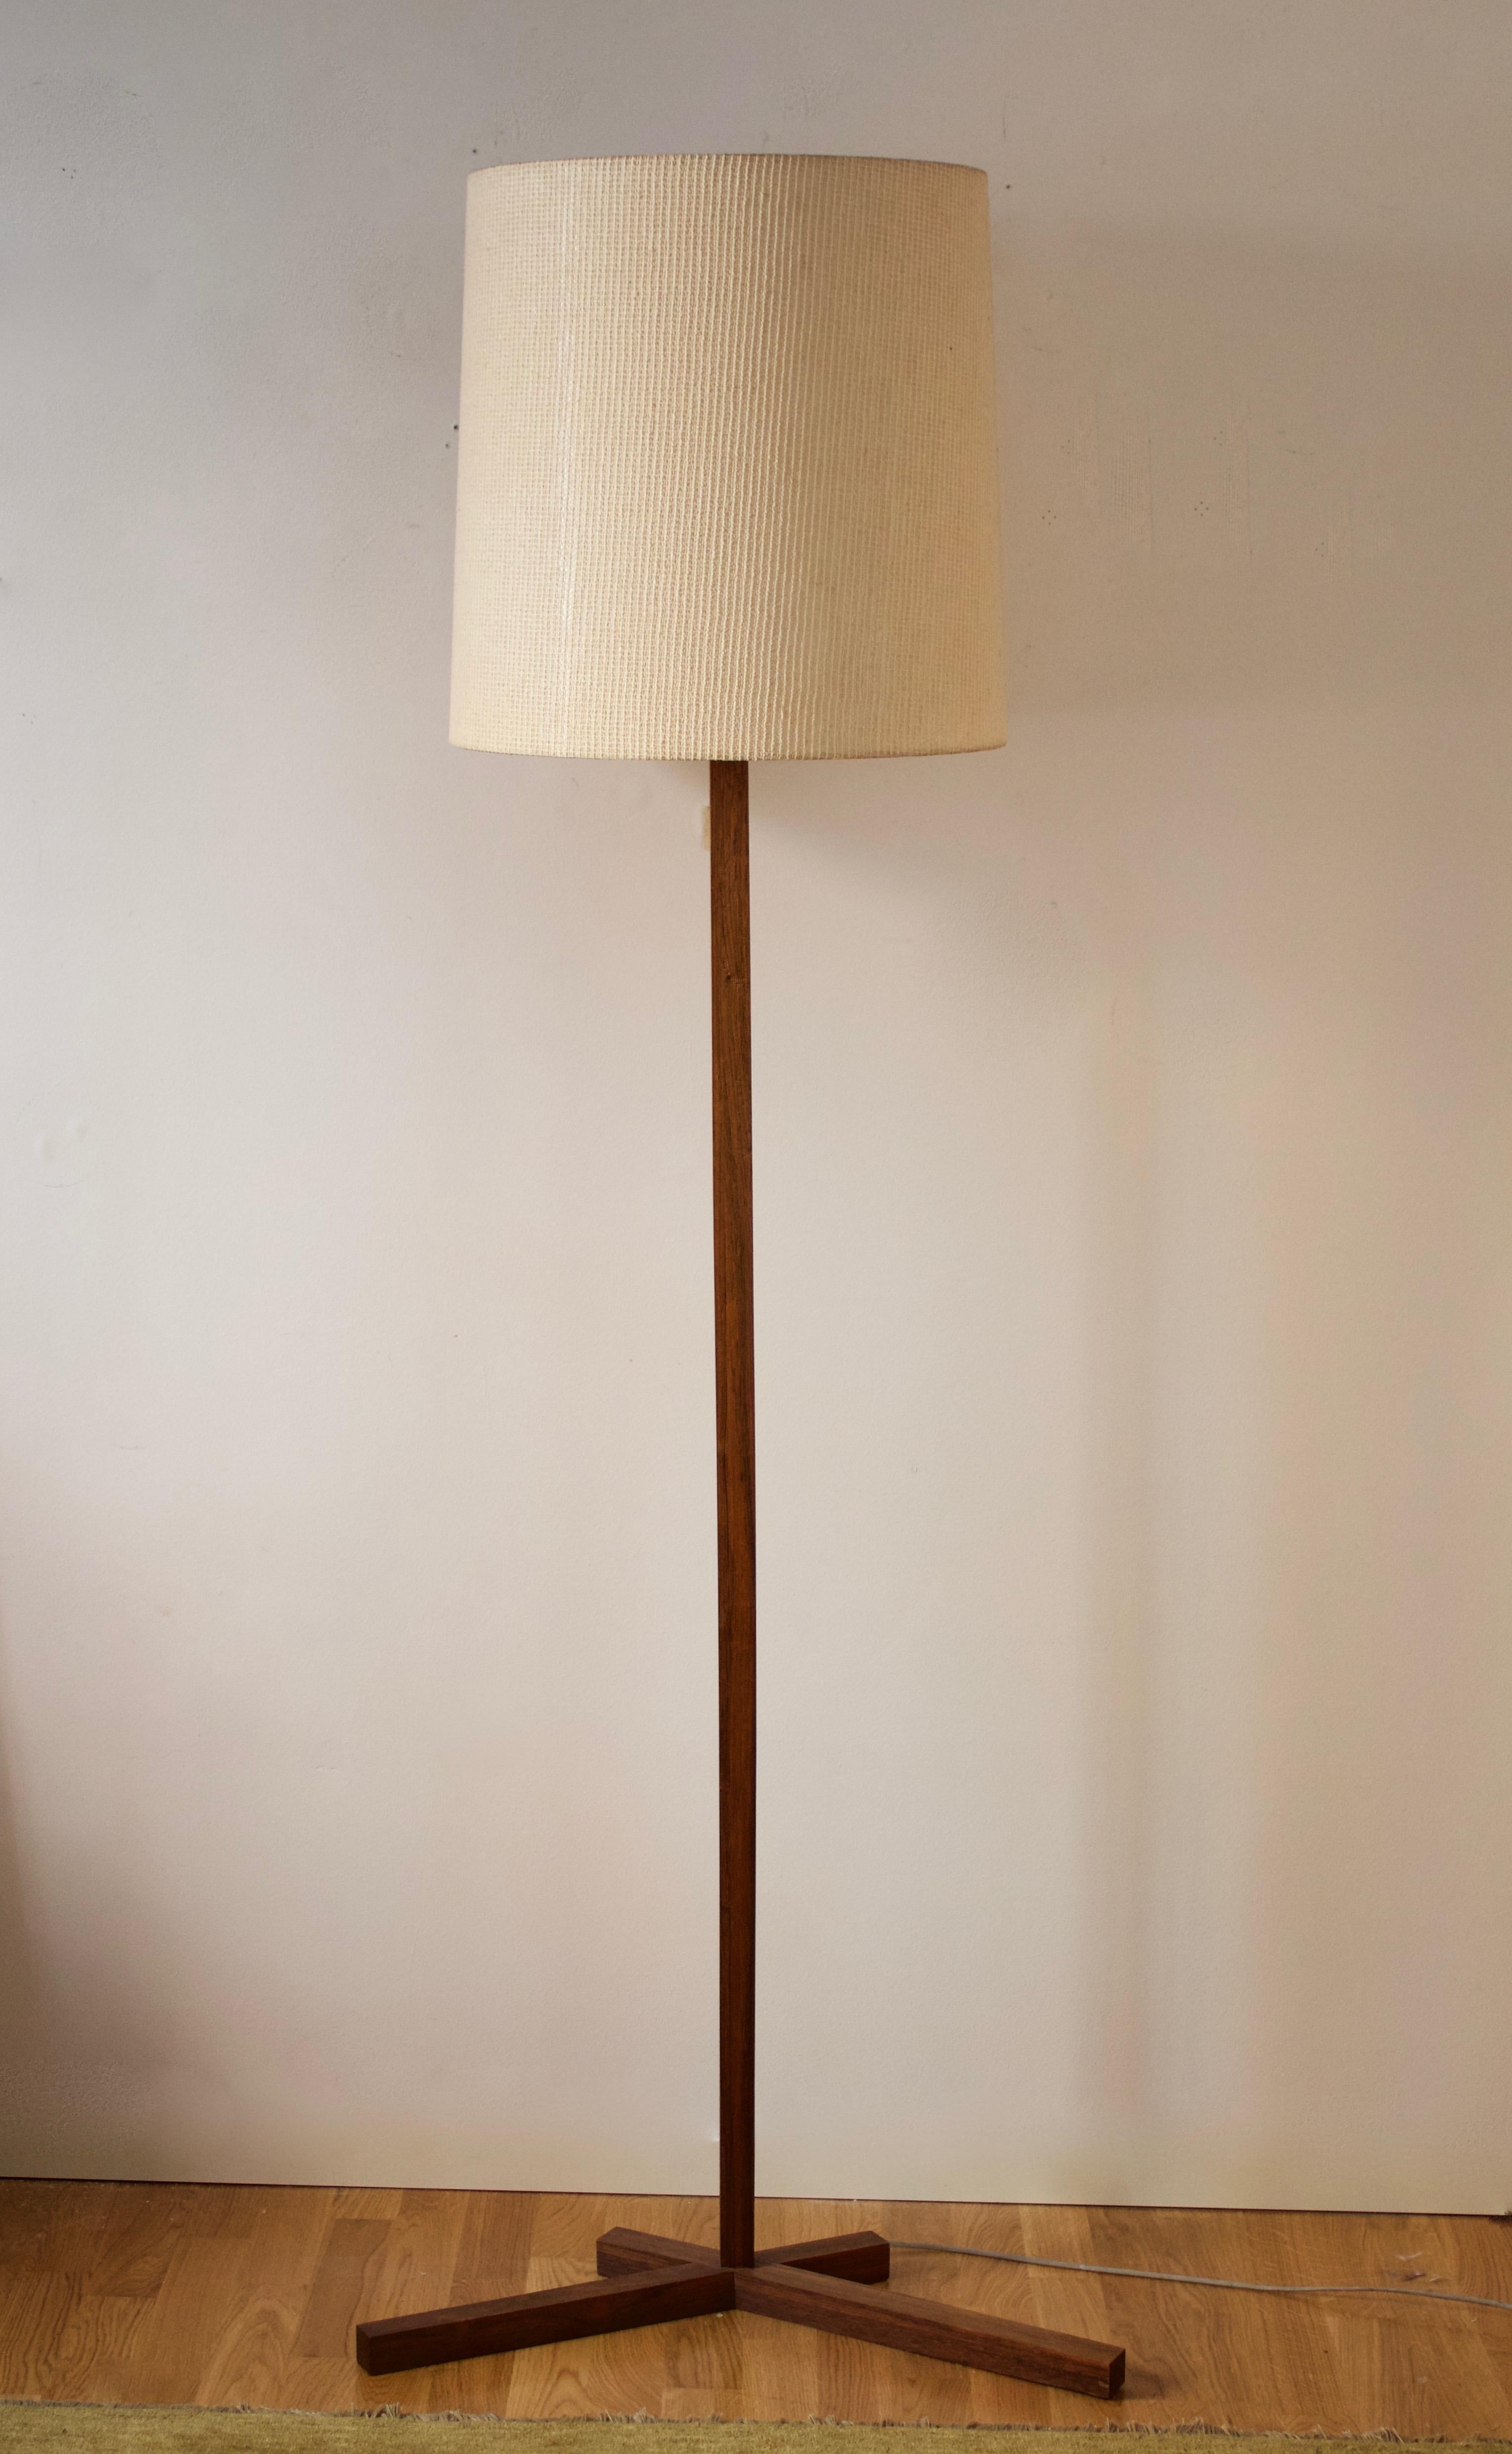 A large floor lamp, designed and produced in Denmark, c. 1950s.

Features a pure and minimal expression. Original woven fabric lampshade.